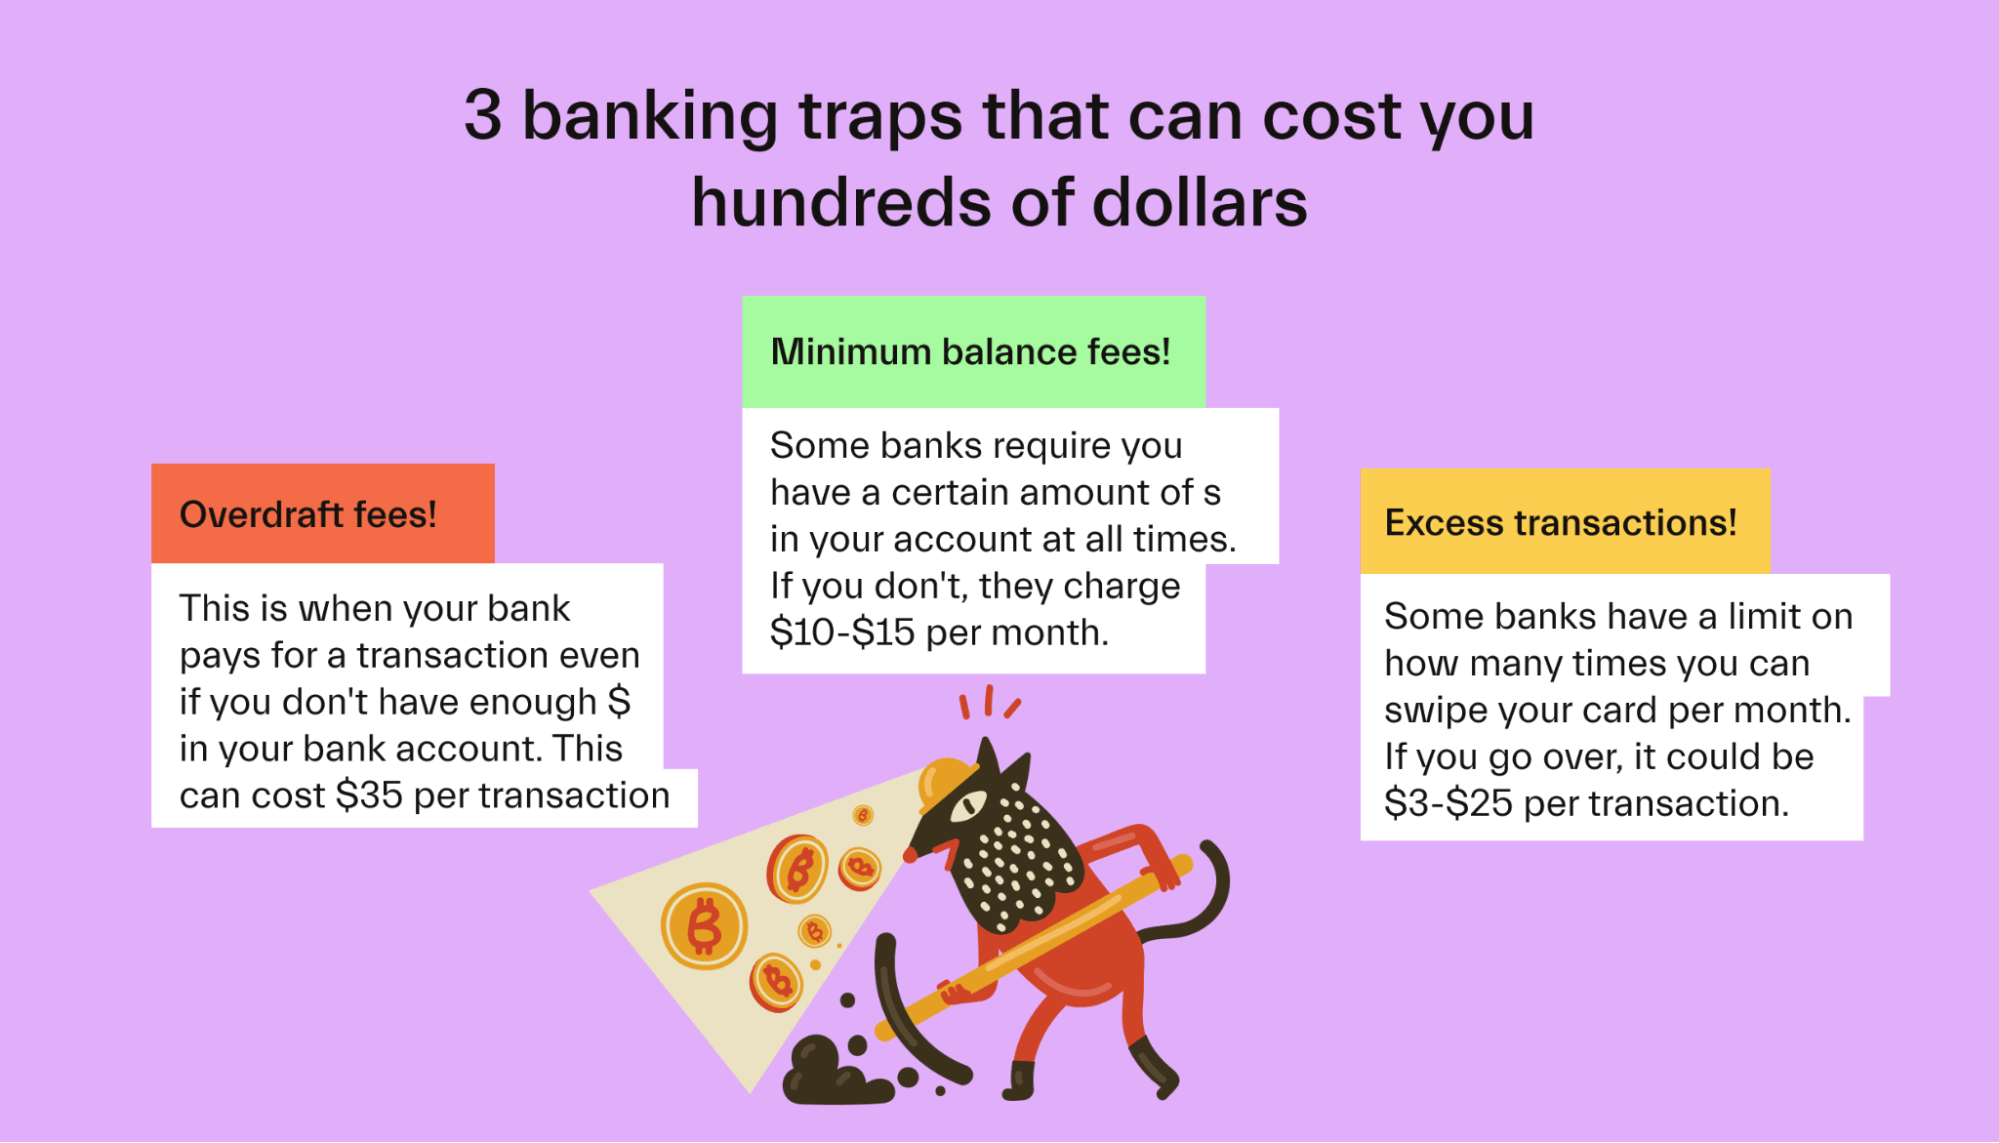 3 Banking Traps that Can Cost You Hundreds of Dollars